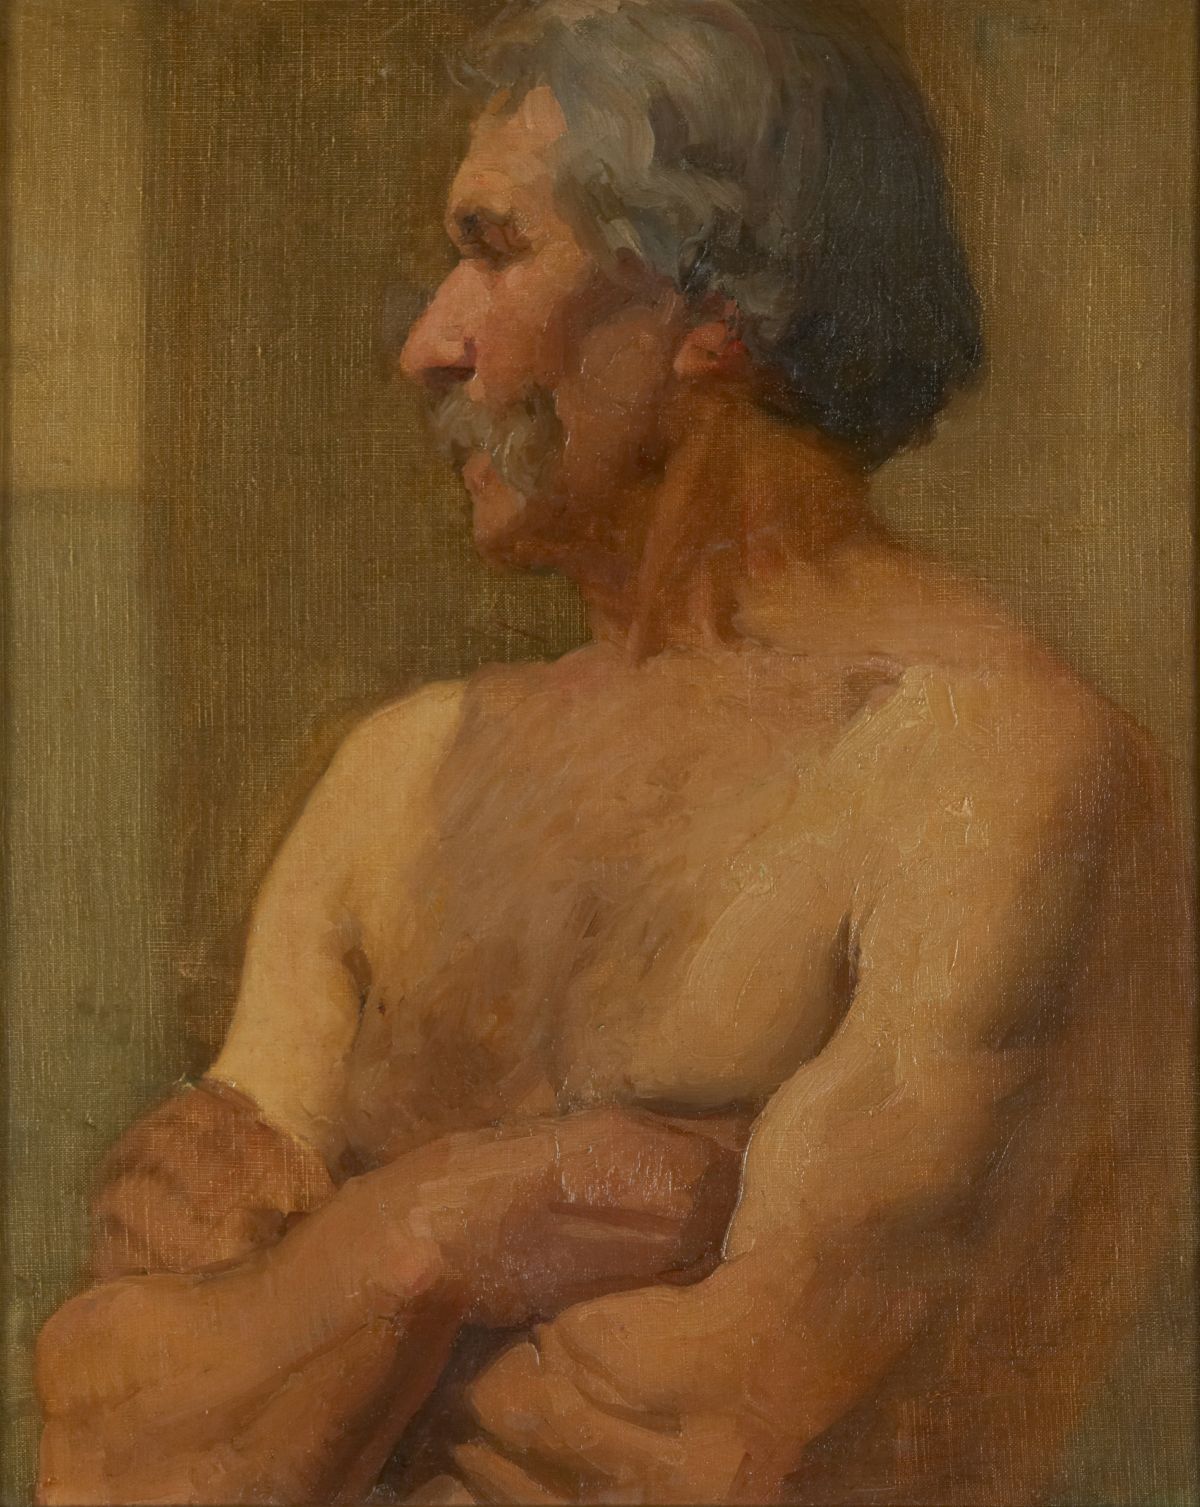 Man with Folded Arms